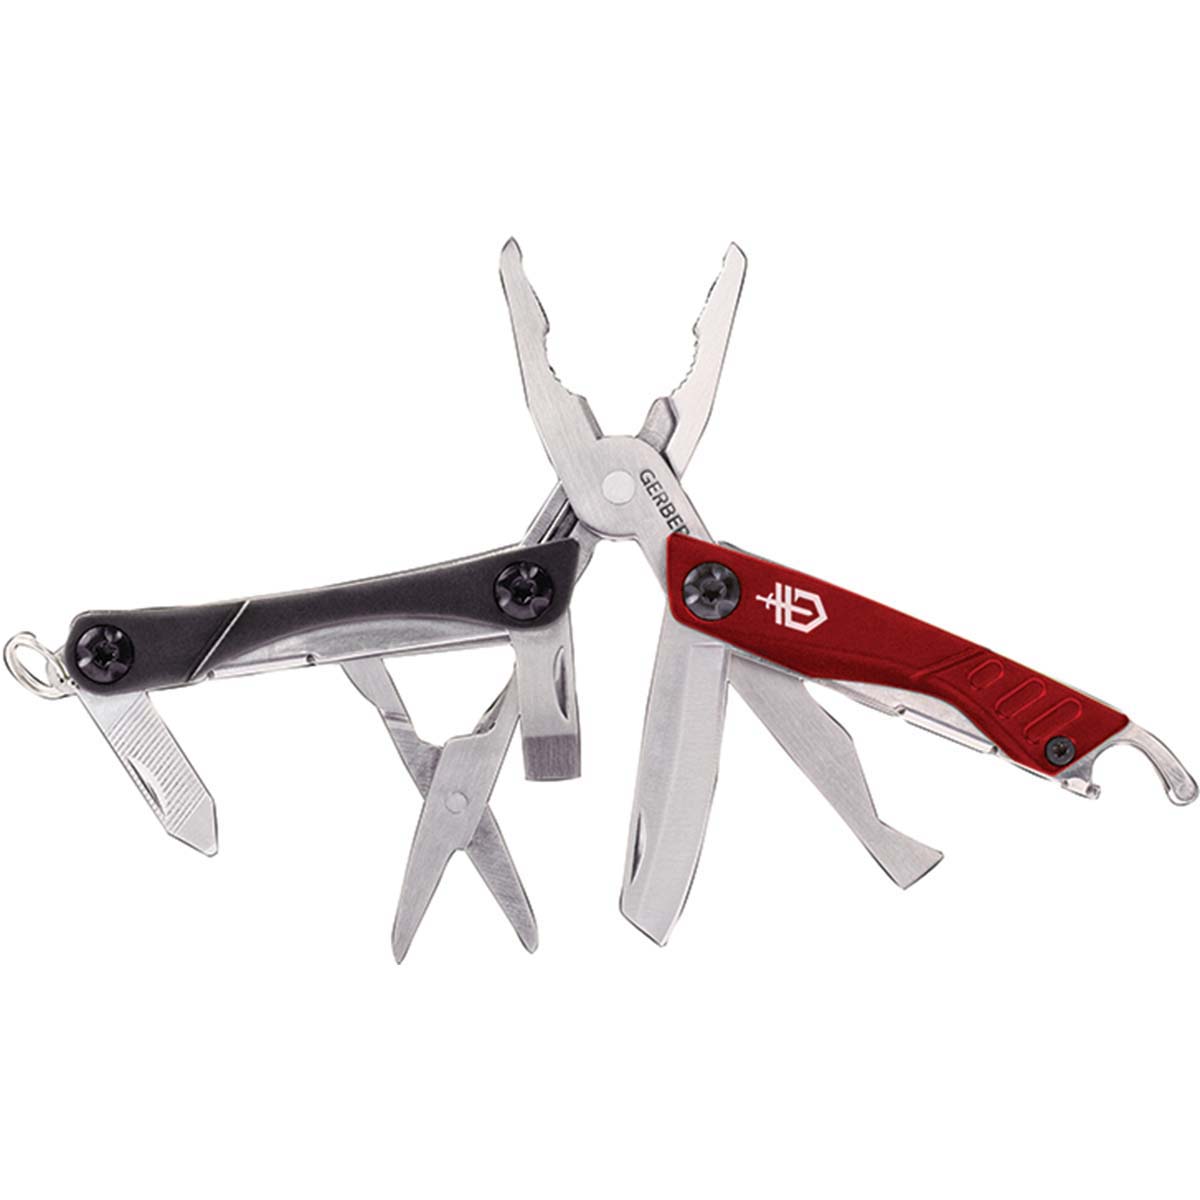 Gerber Dime Keychain Multi-tool Red